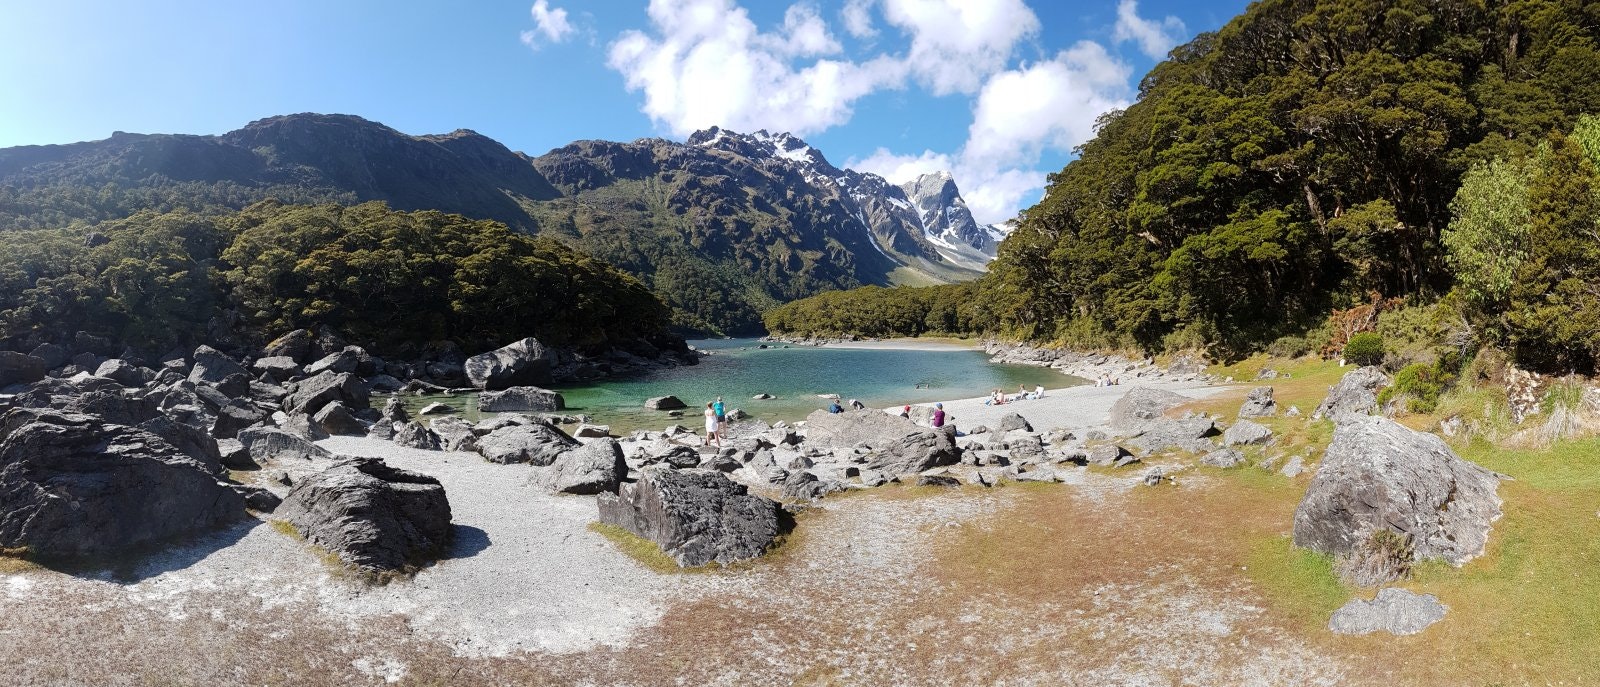 a panoramic shot of Lake MacKenzie on New Zealand's South Island on a sunny day. There are a few people near the water's edge standing and lying on a small stony beach. The blue water is surrounded by rocky, snow-capped mountains and lush greenery.